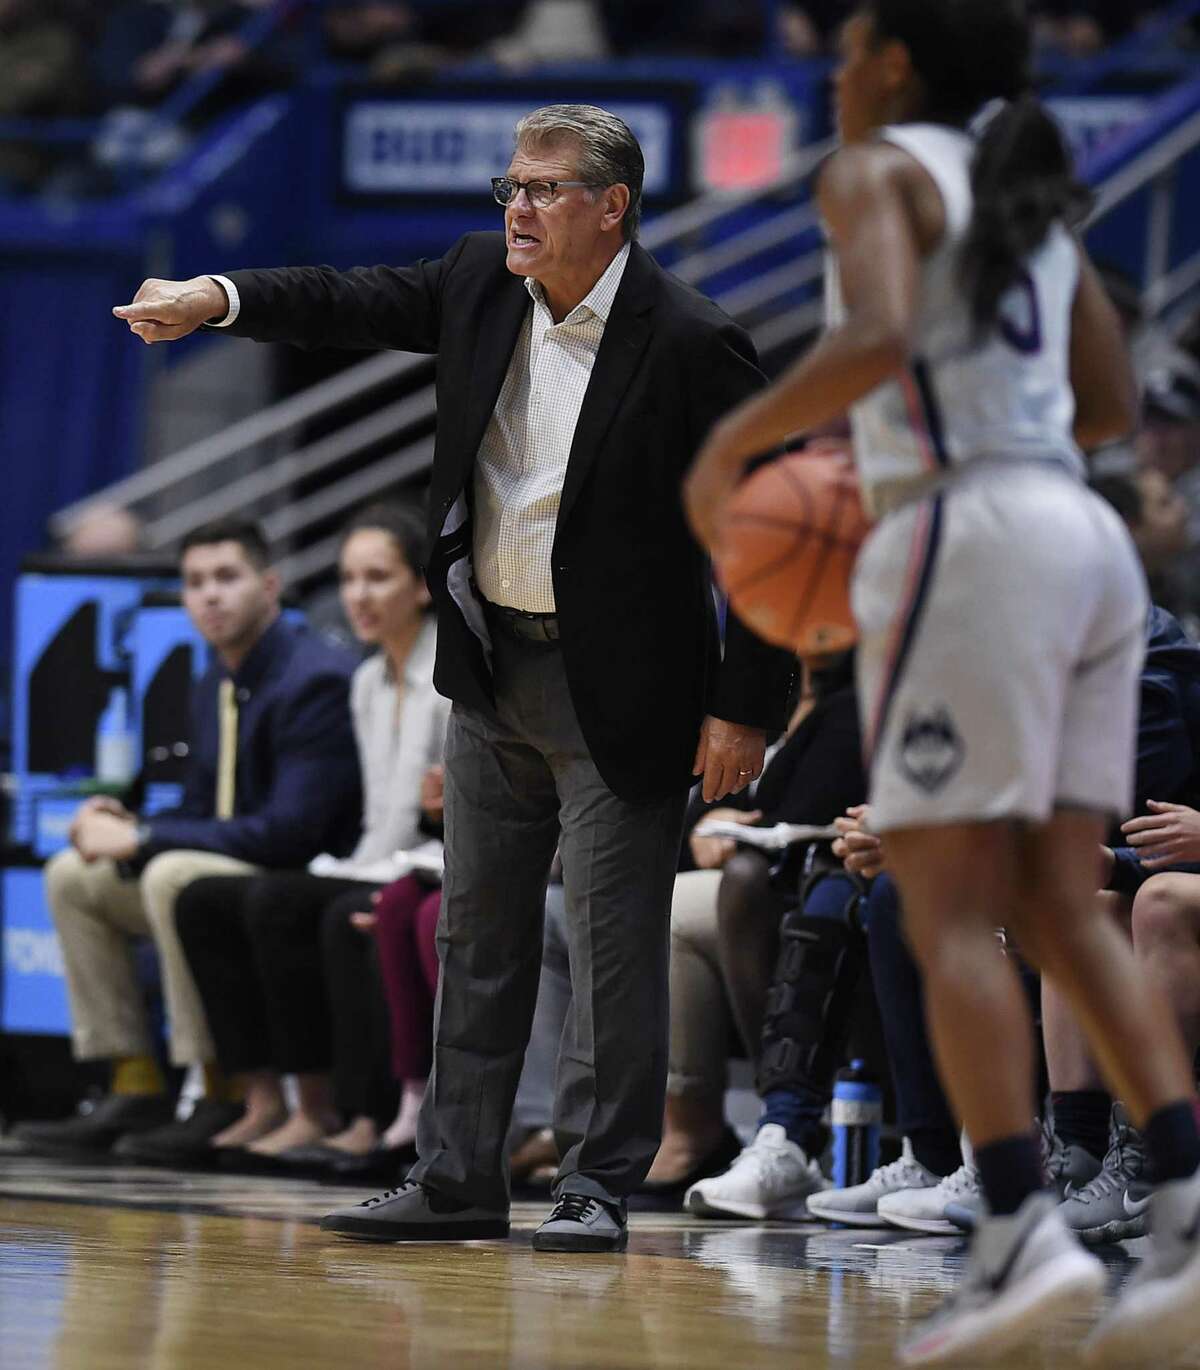 UConn coach Geno Auriemma gestures to his team during the second half against DePaul in Hartford Wednesday. (AP Photo/Jessica Hill)